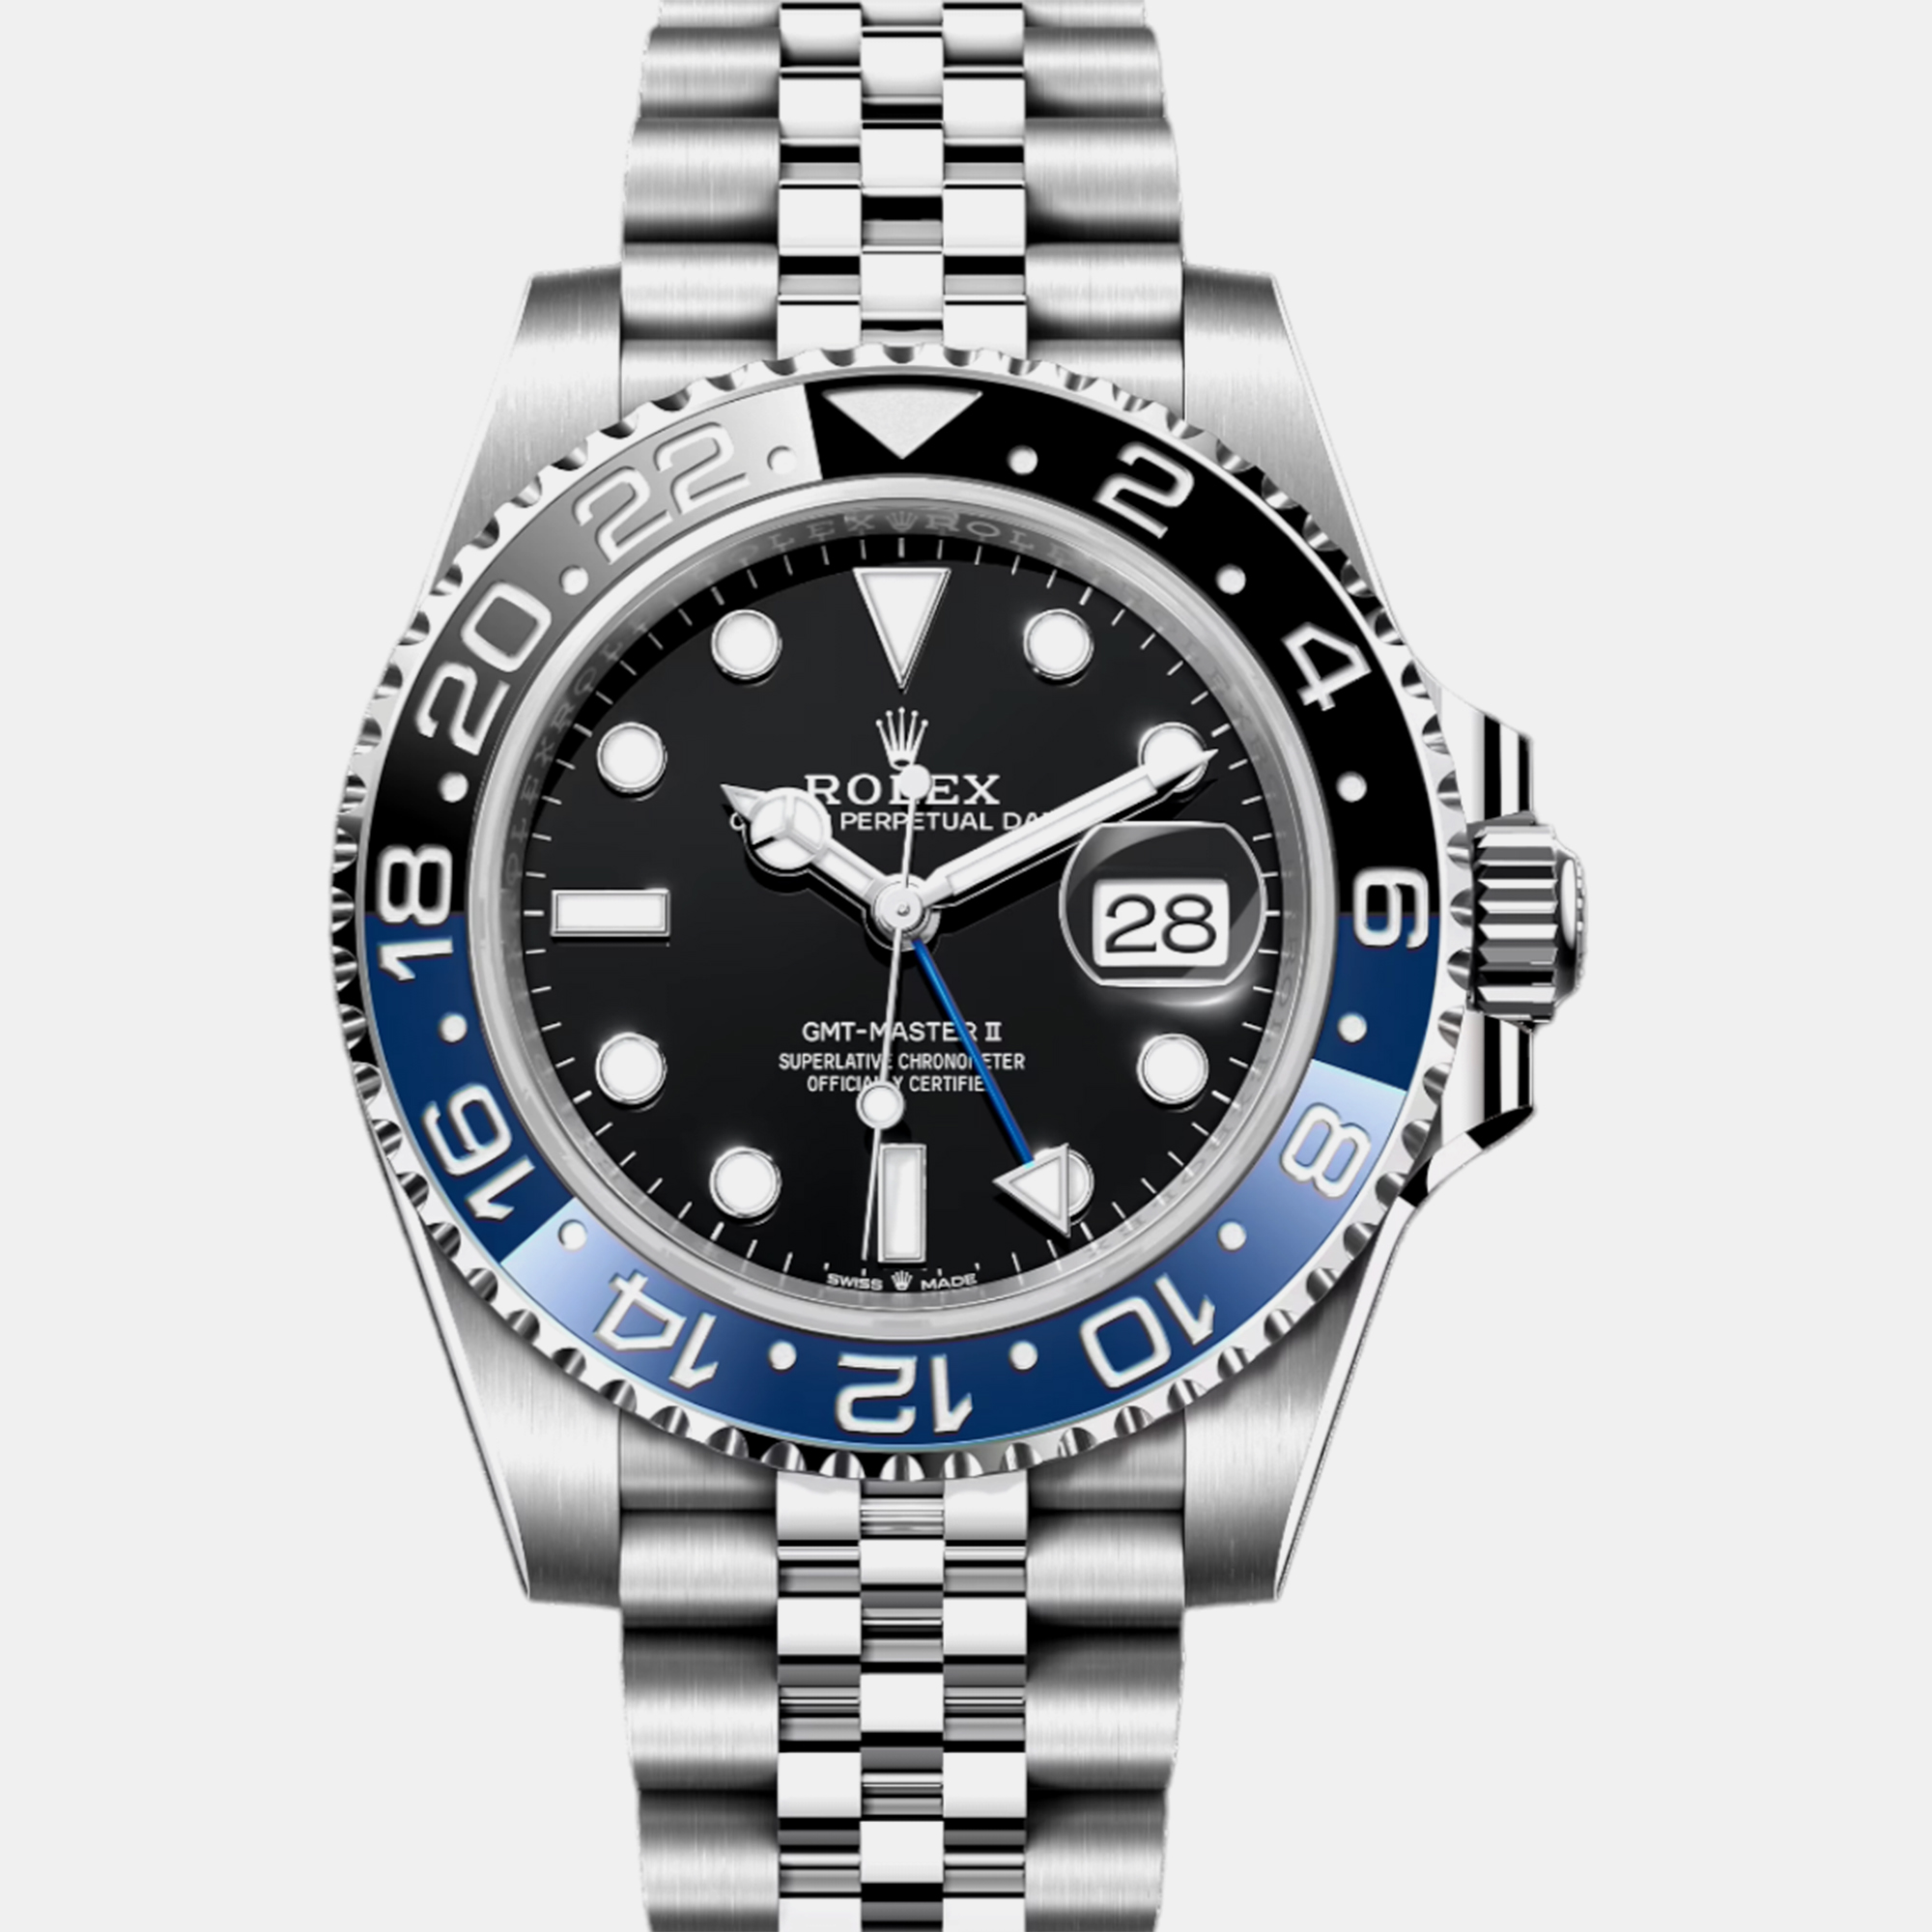 

Rolex -Stainless Steel automatic GMT-Master II 126710 BLNR 40 mm, Black